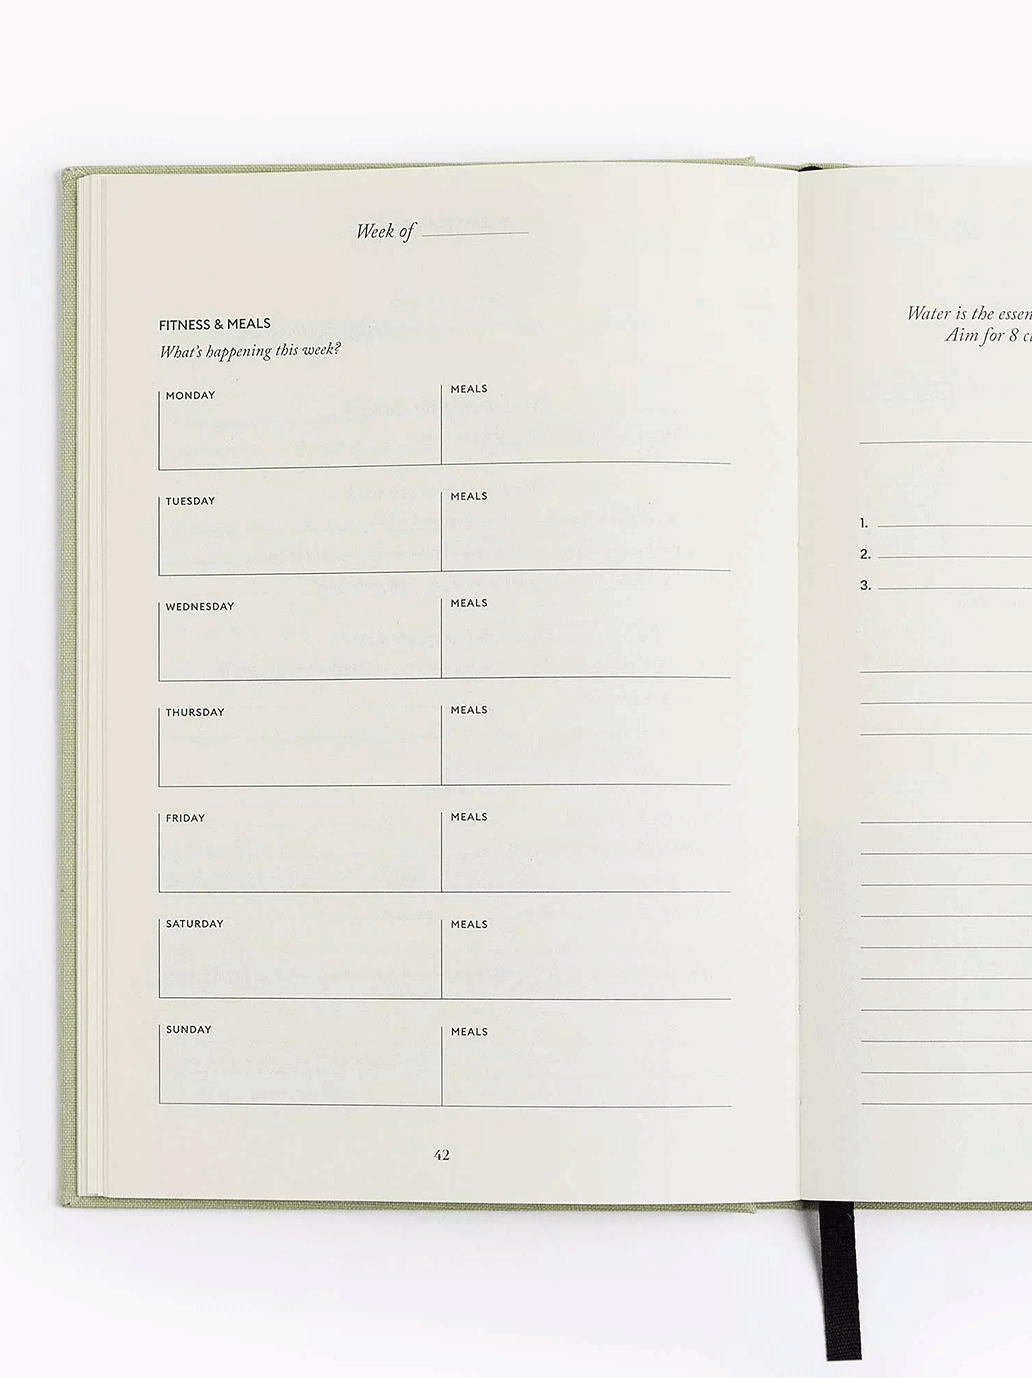 The Five Minute Journal notebook